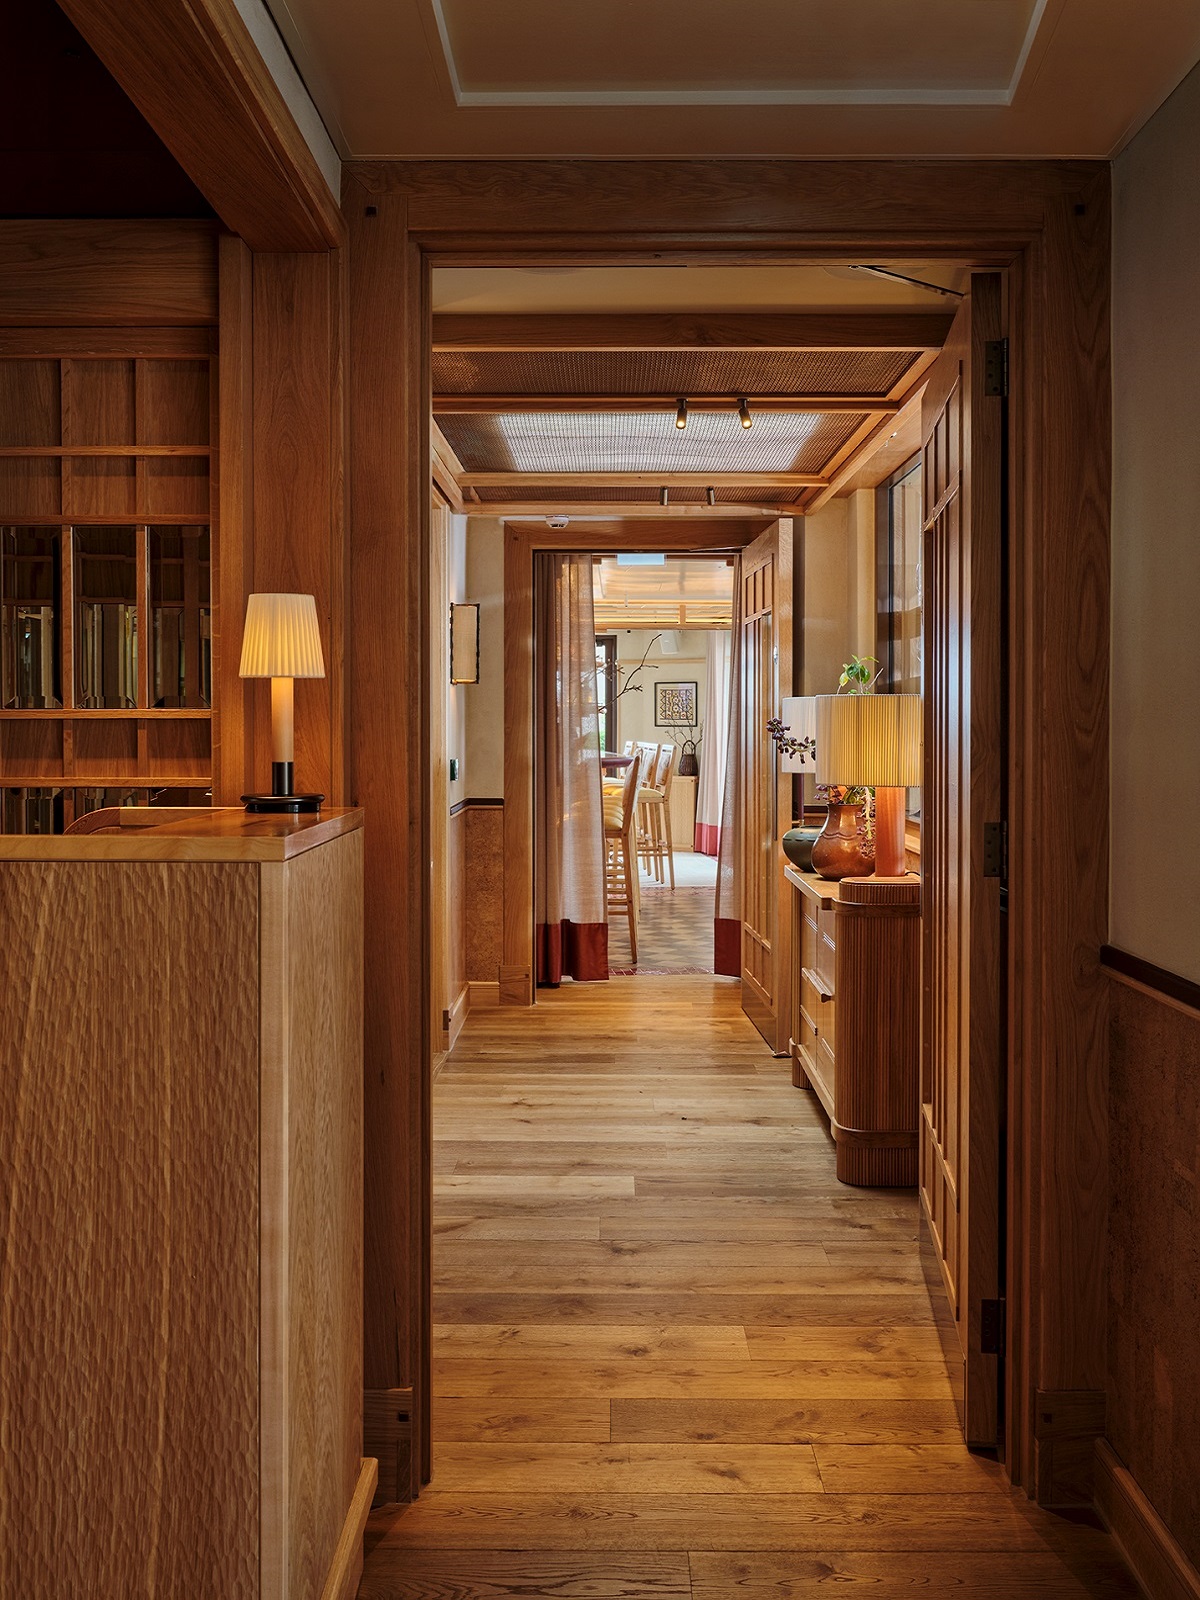 wooden detail entrance and cabinetry in Kioku